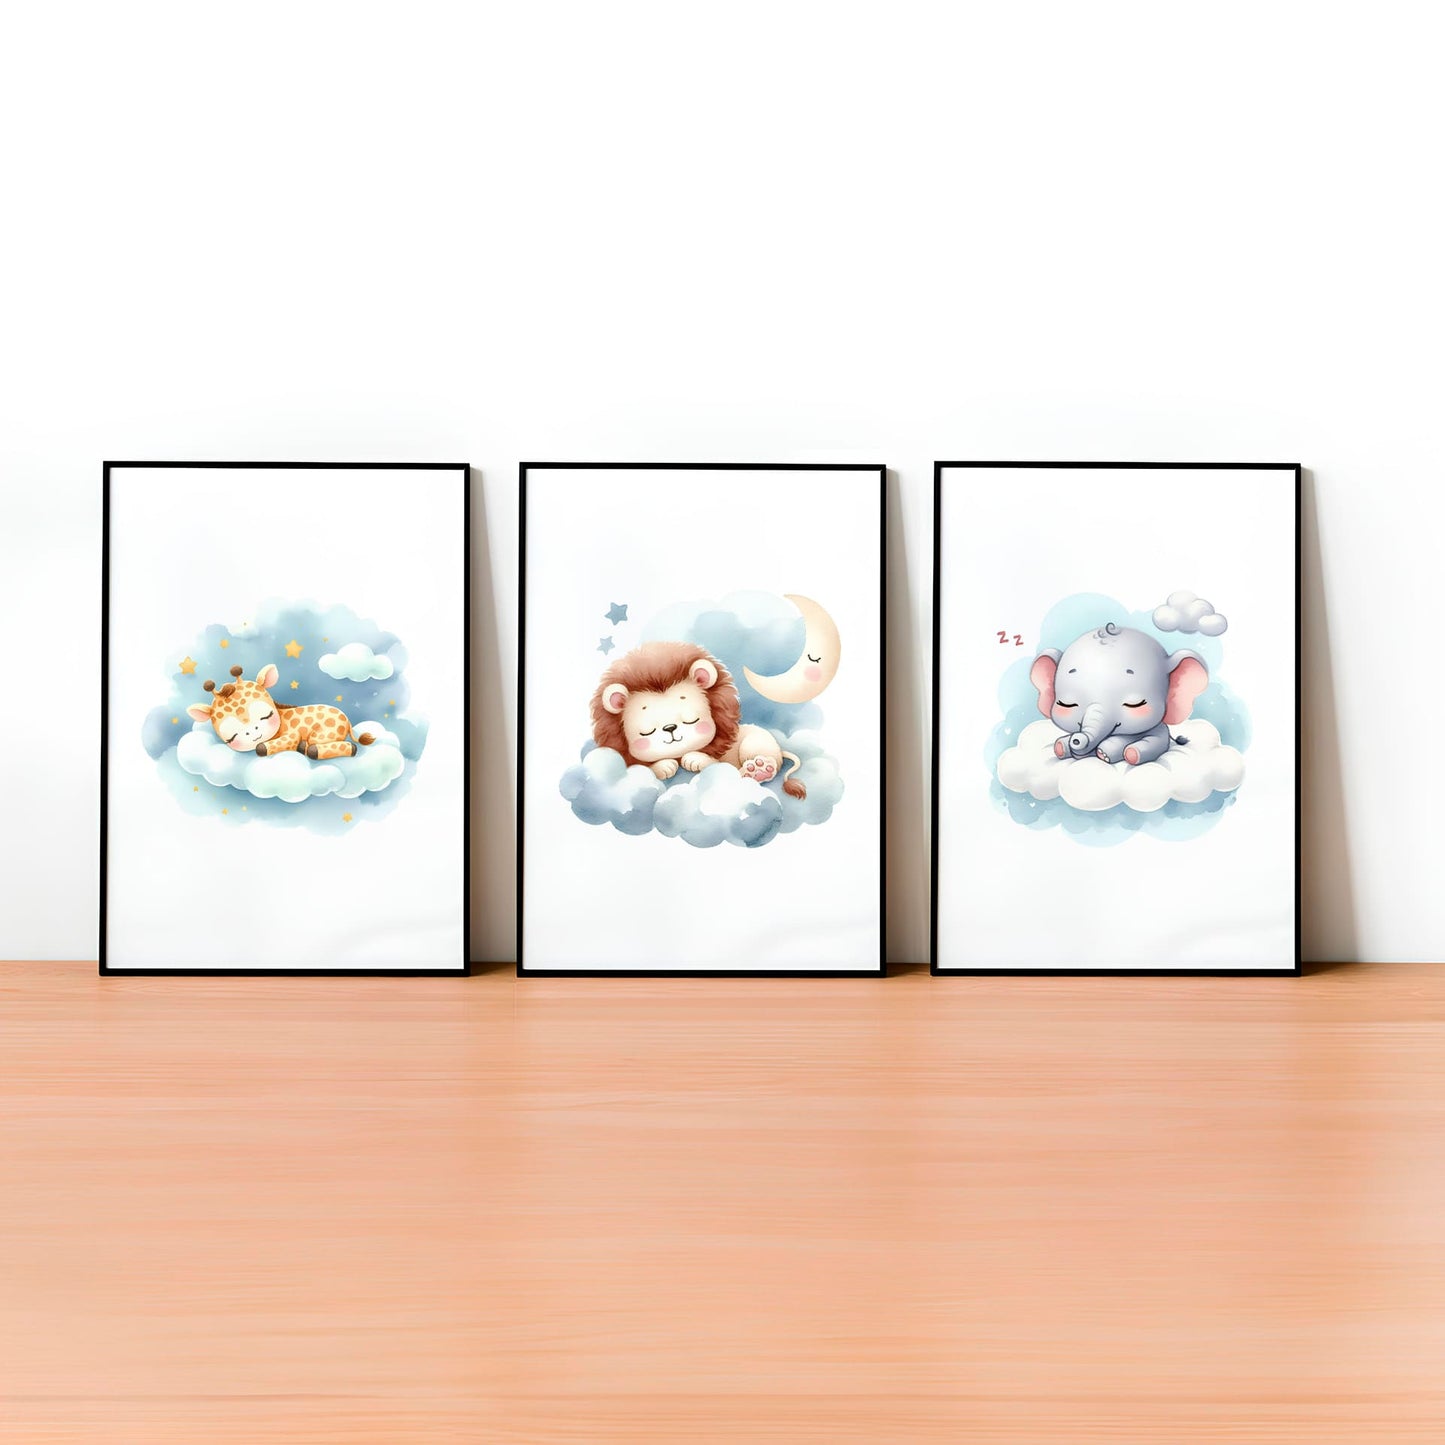 Set of three A4 prints in watercolour style. The first print shows a baby tiger sleeping on a cloud, the second depicts a baby elephant sleeping on a cloud, and the third features a baby giraffe sleeping on a cloud.